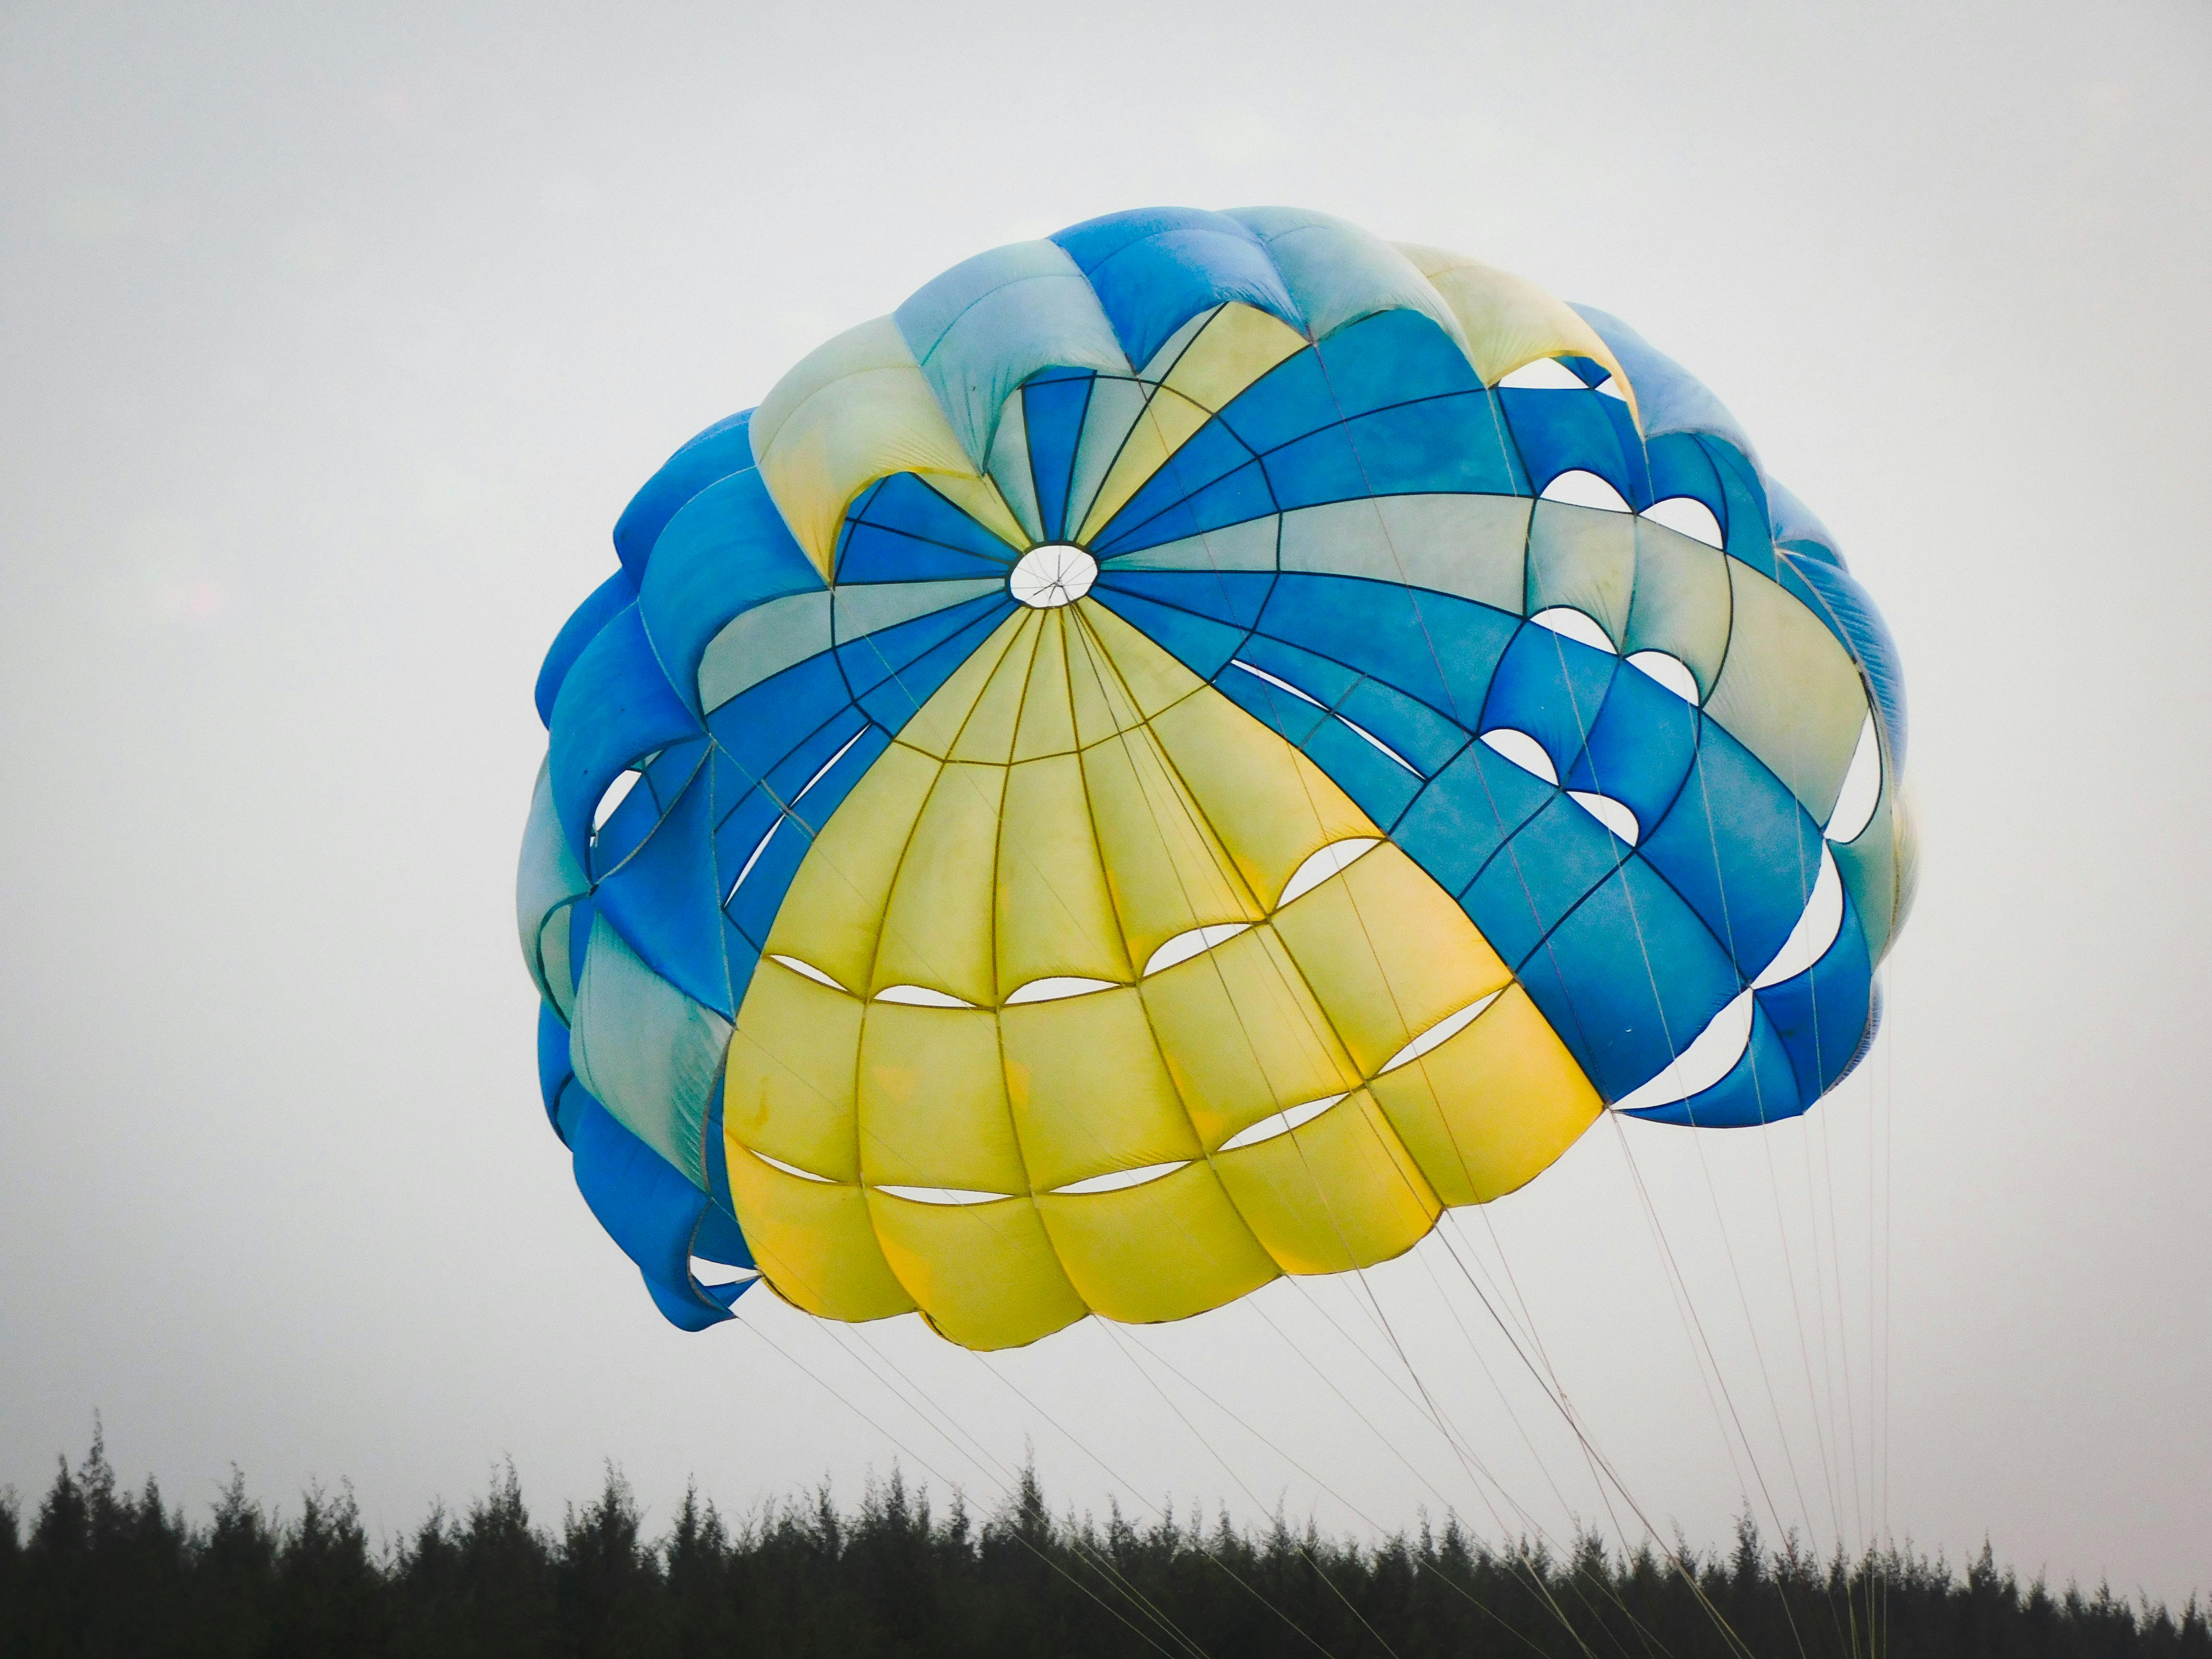 a person is parasailing in the air